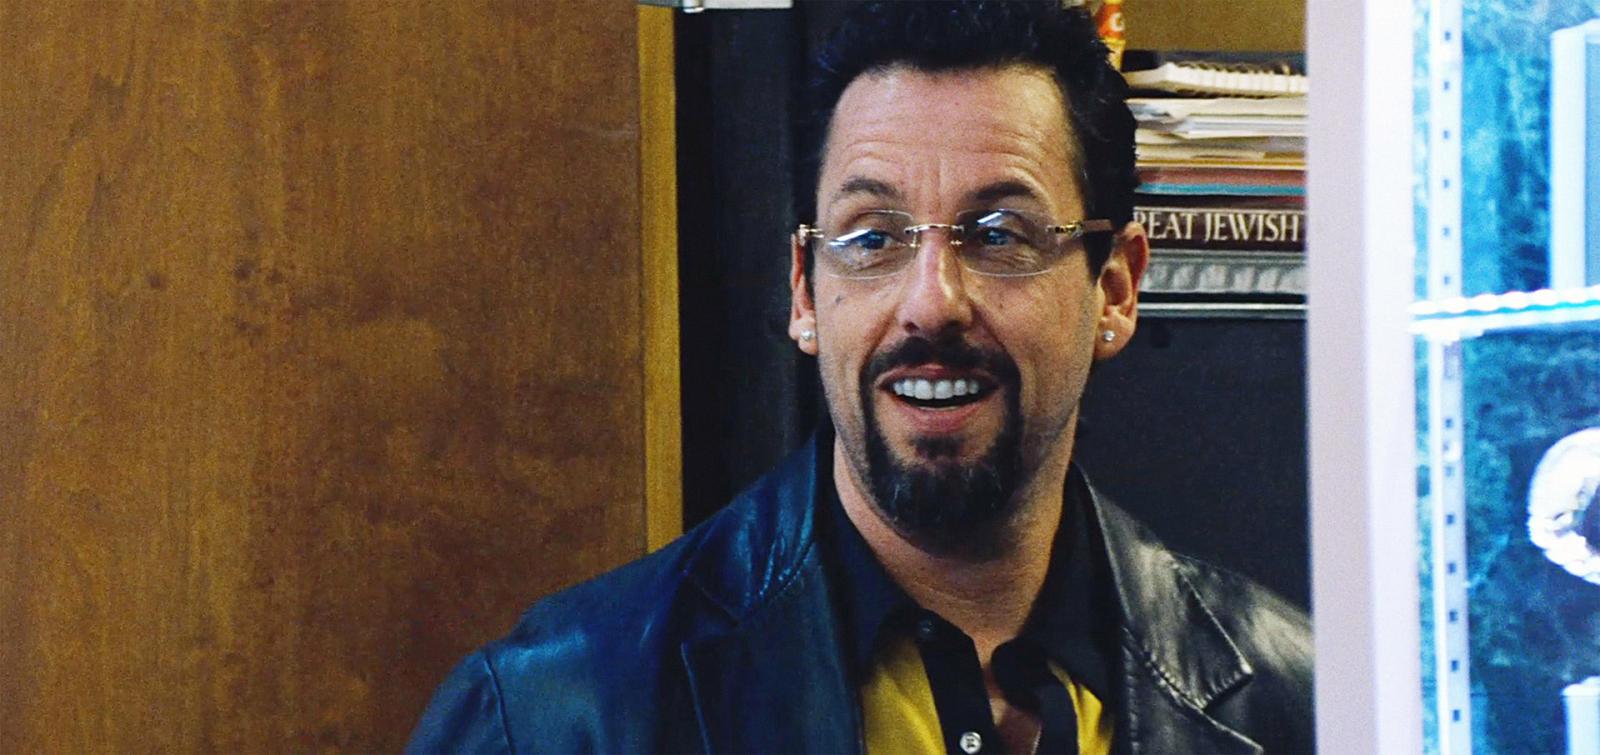 8 Best Adam Sandler Movies, Ranked by Rotten Tomatoes Score - image 6